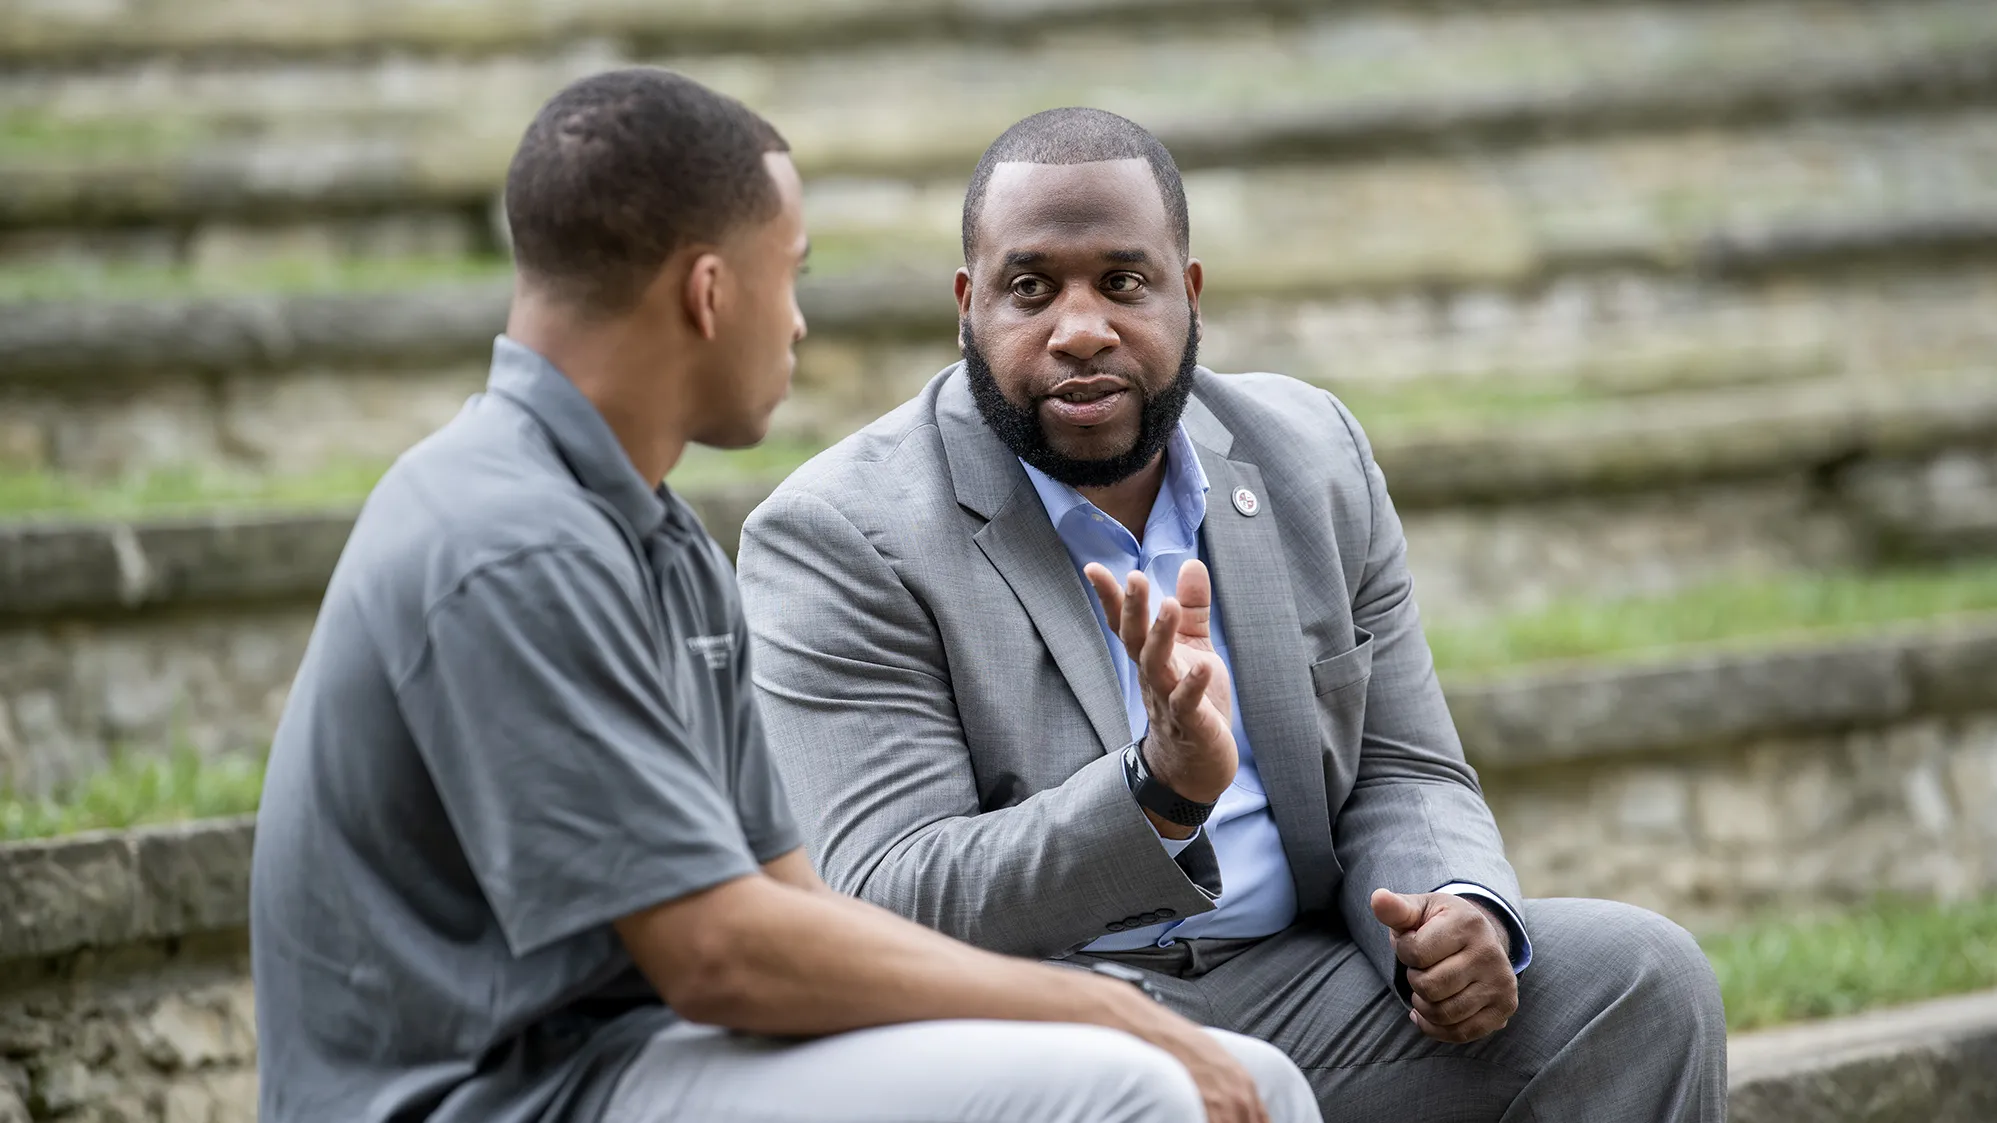 Dan Thomas, a Black man with neatly trimmed hair and beard, gestures as he looks directly at student Mike Hull, a young Black man looking away from the camera as he meets Thomas’ eyes. They look like they’re having a meaningful conversation.